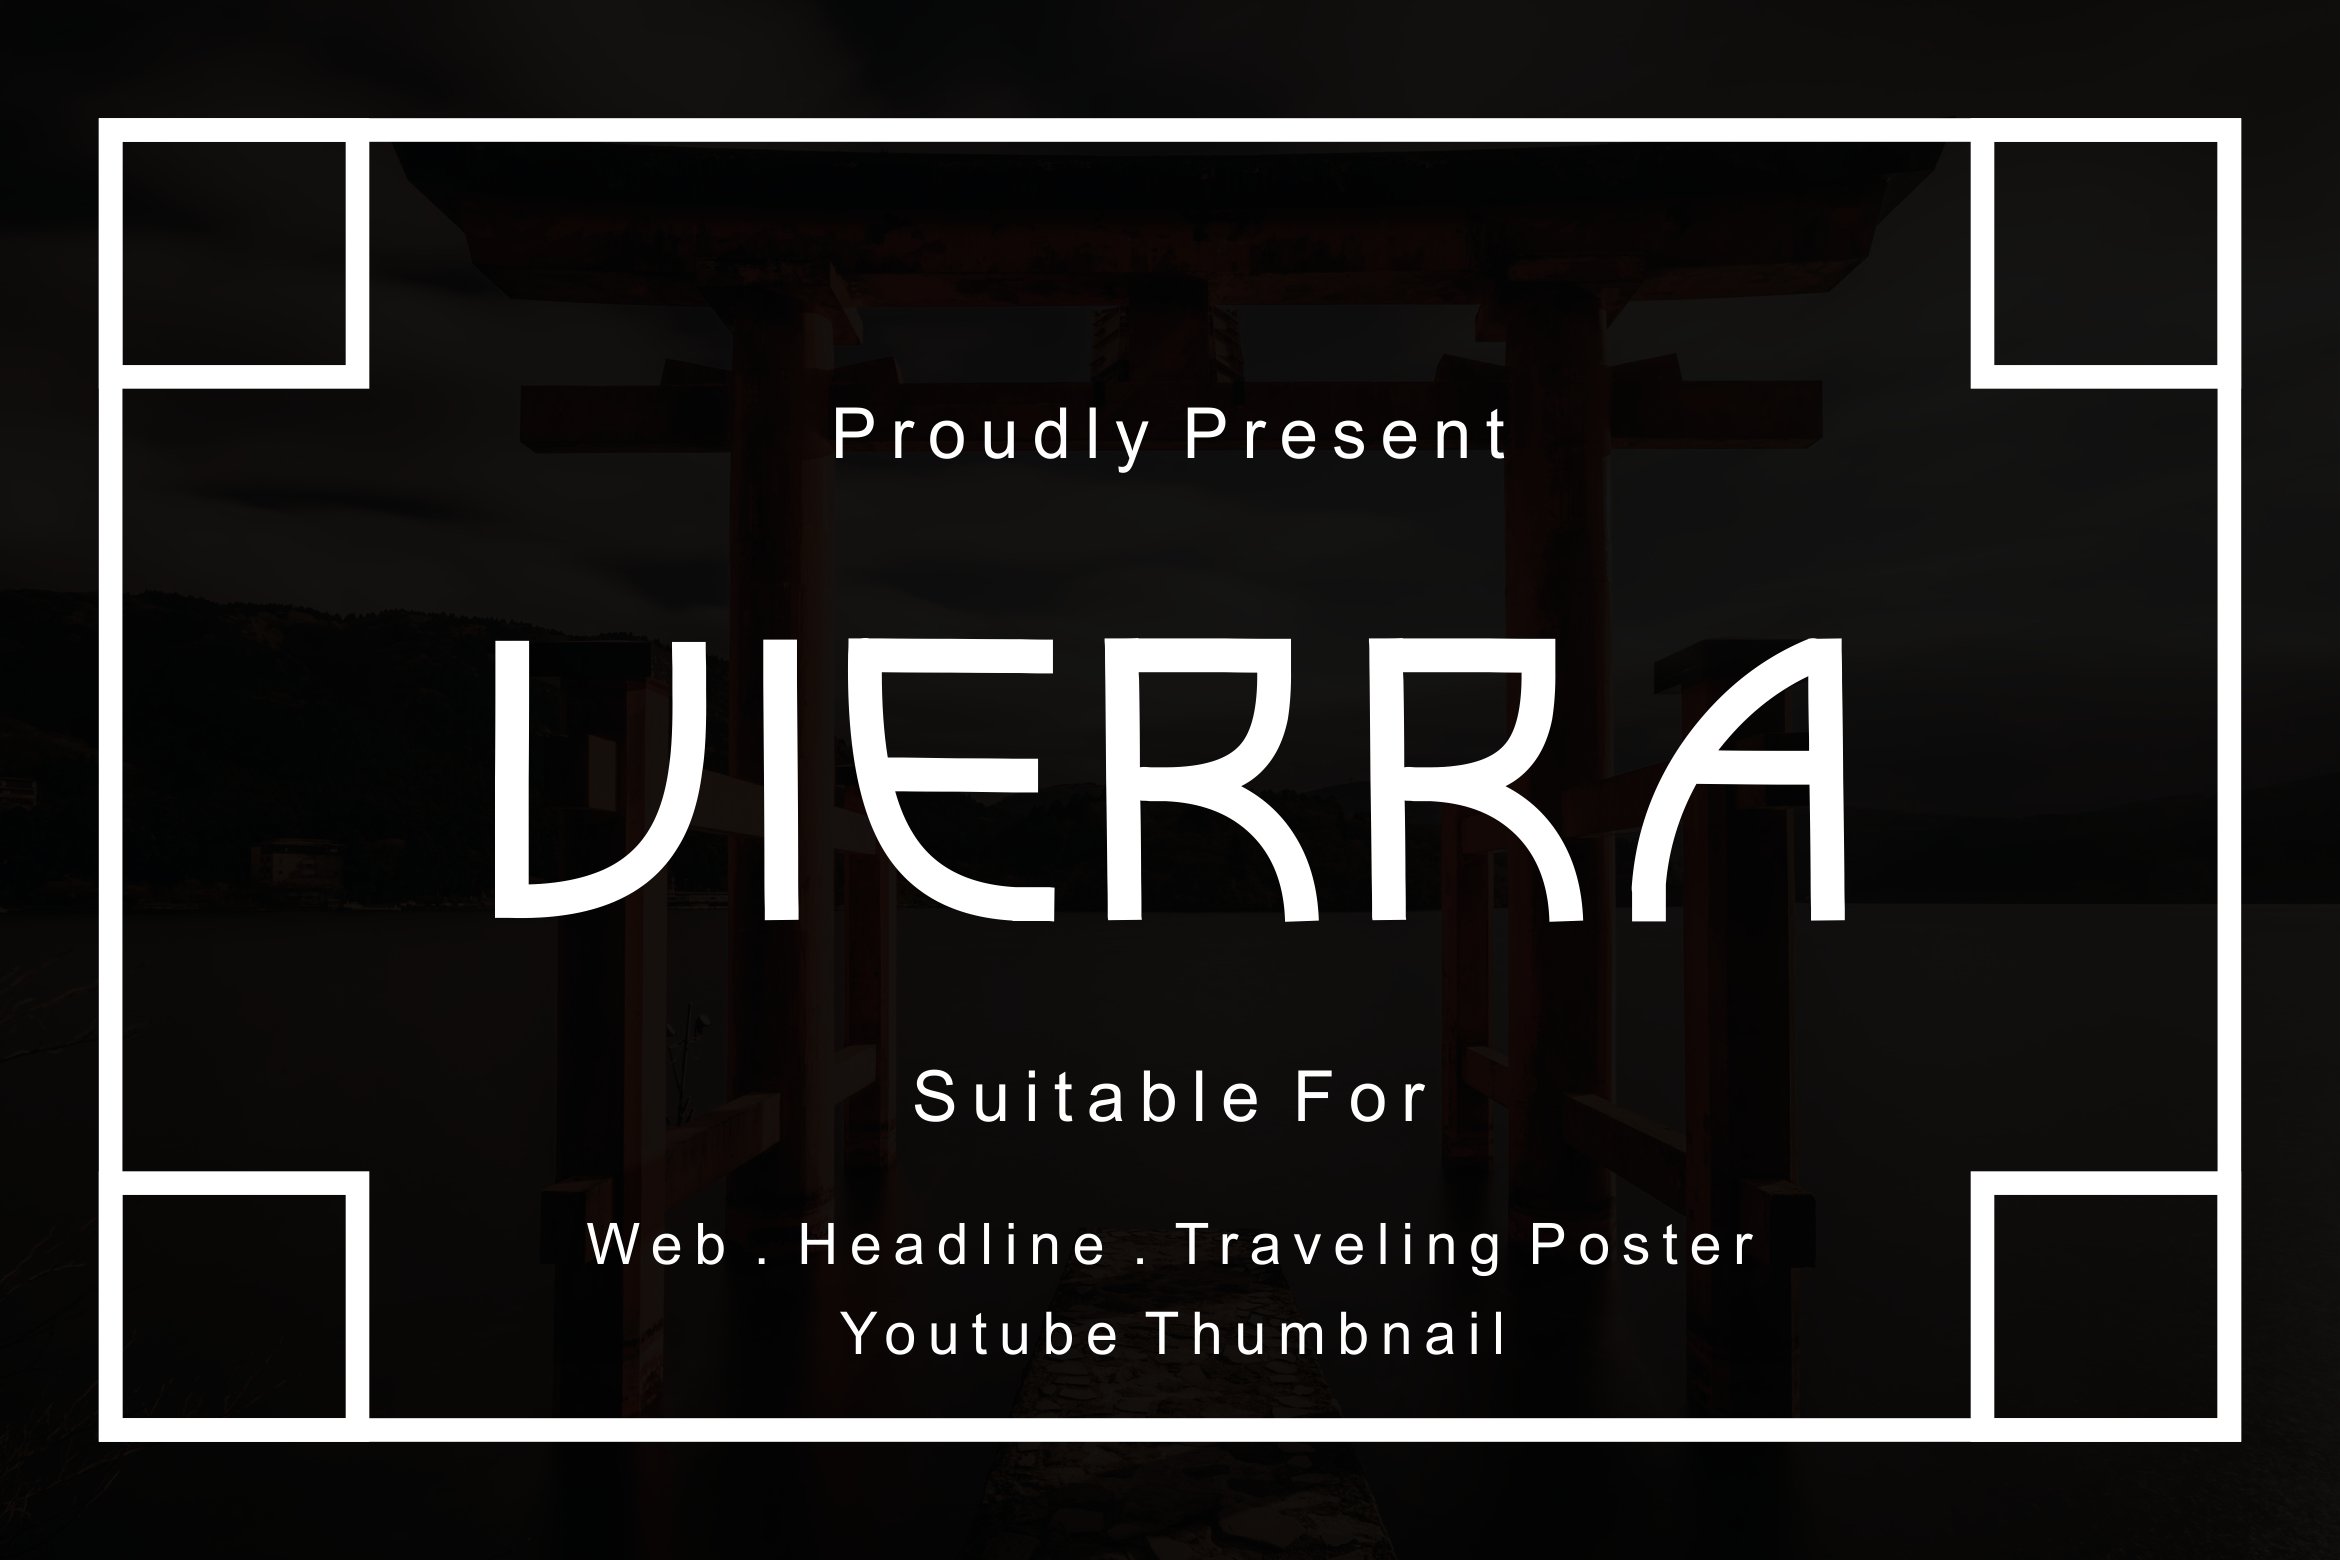 Vierra Faux Japanese Font cover image.